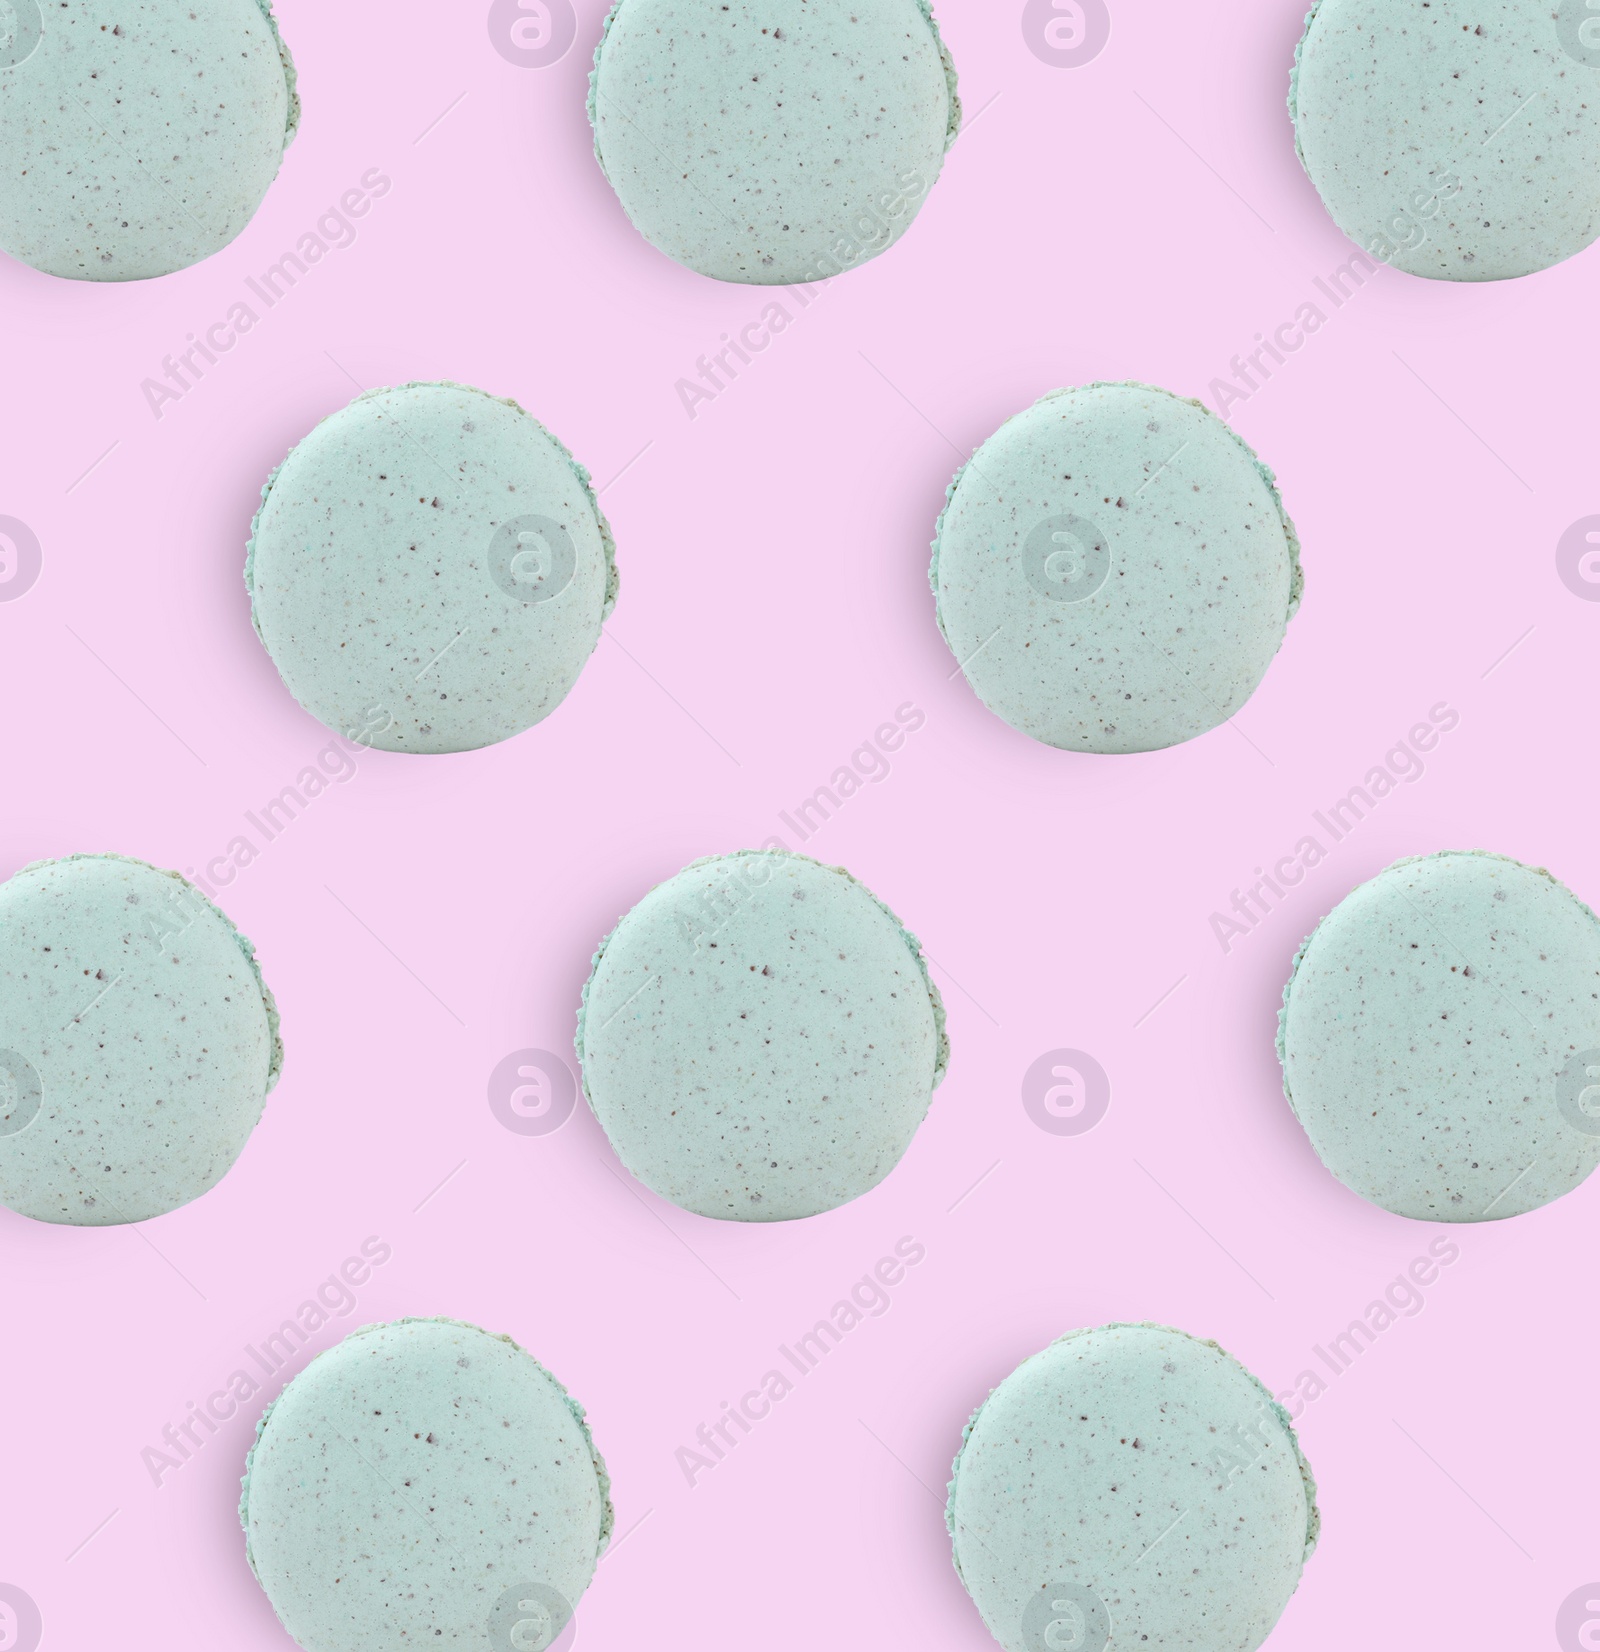 Image of Delicious macarons on lilac background, flat lay 